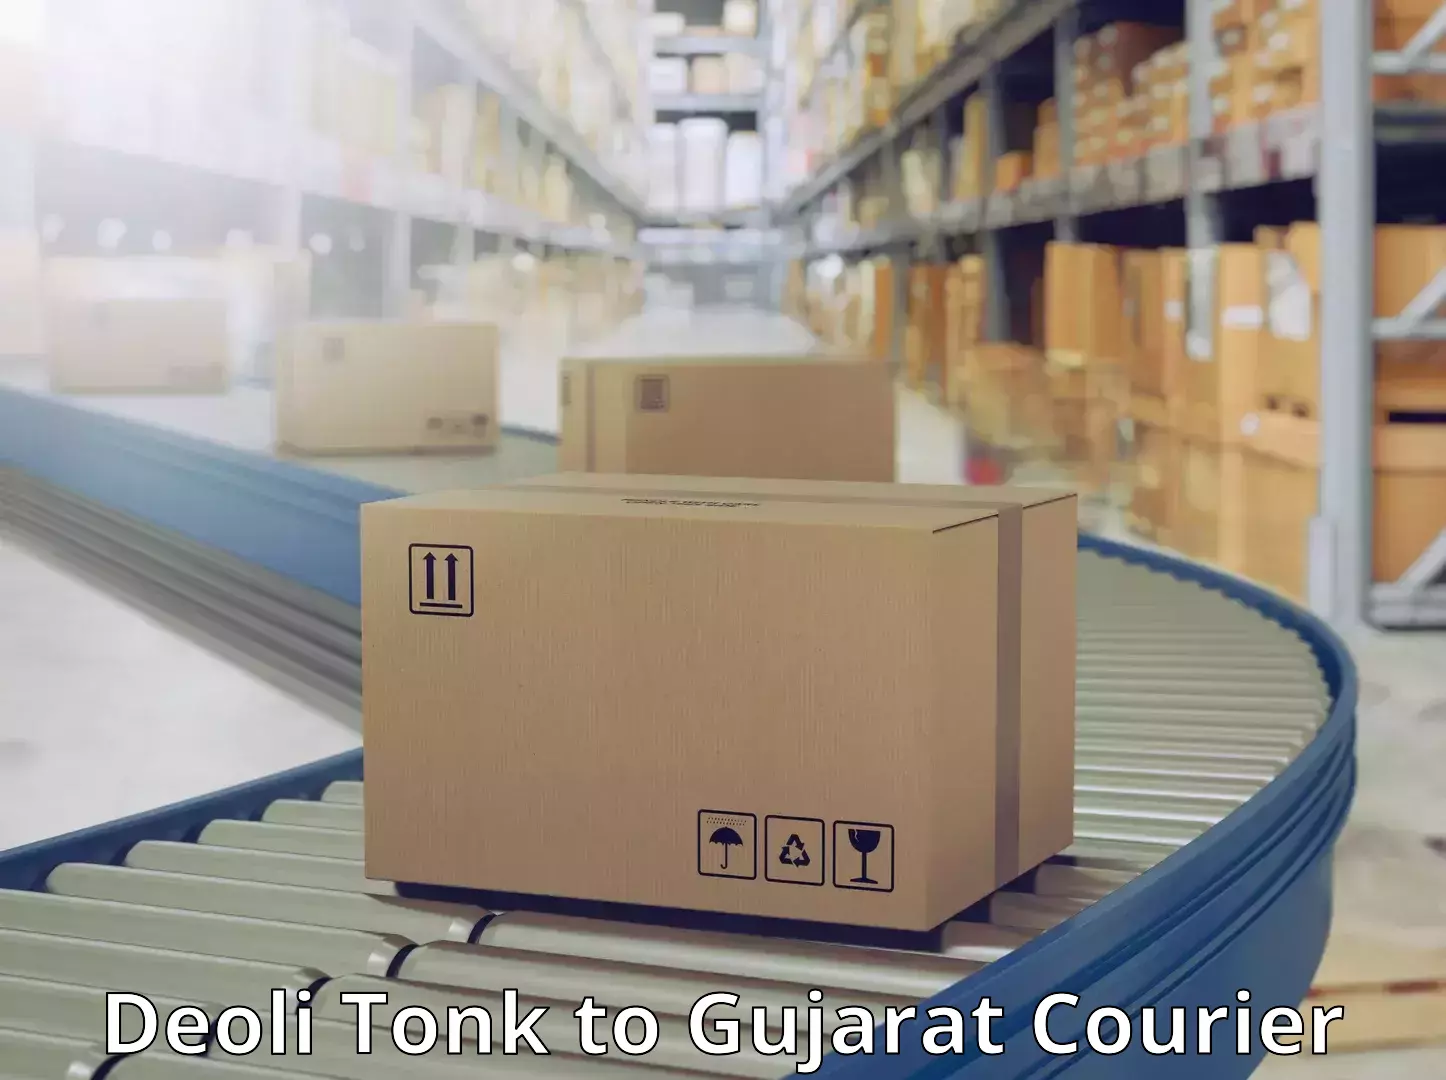 Online courier booking Deoli Tonk to Gujarat